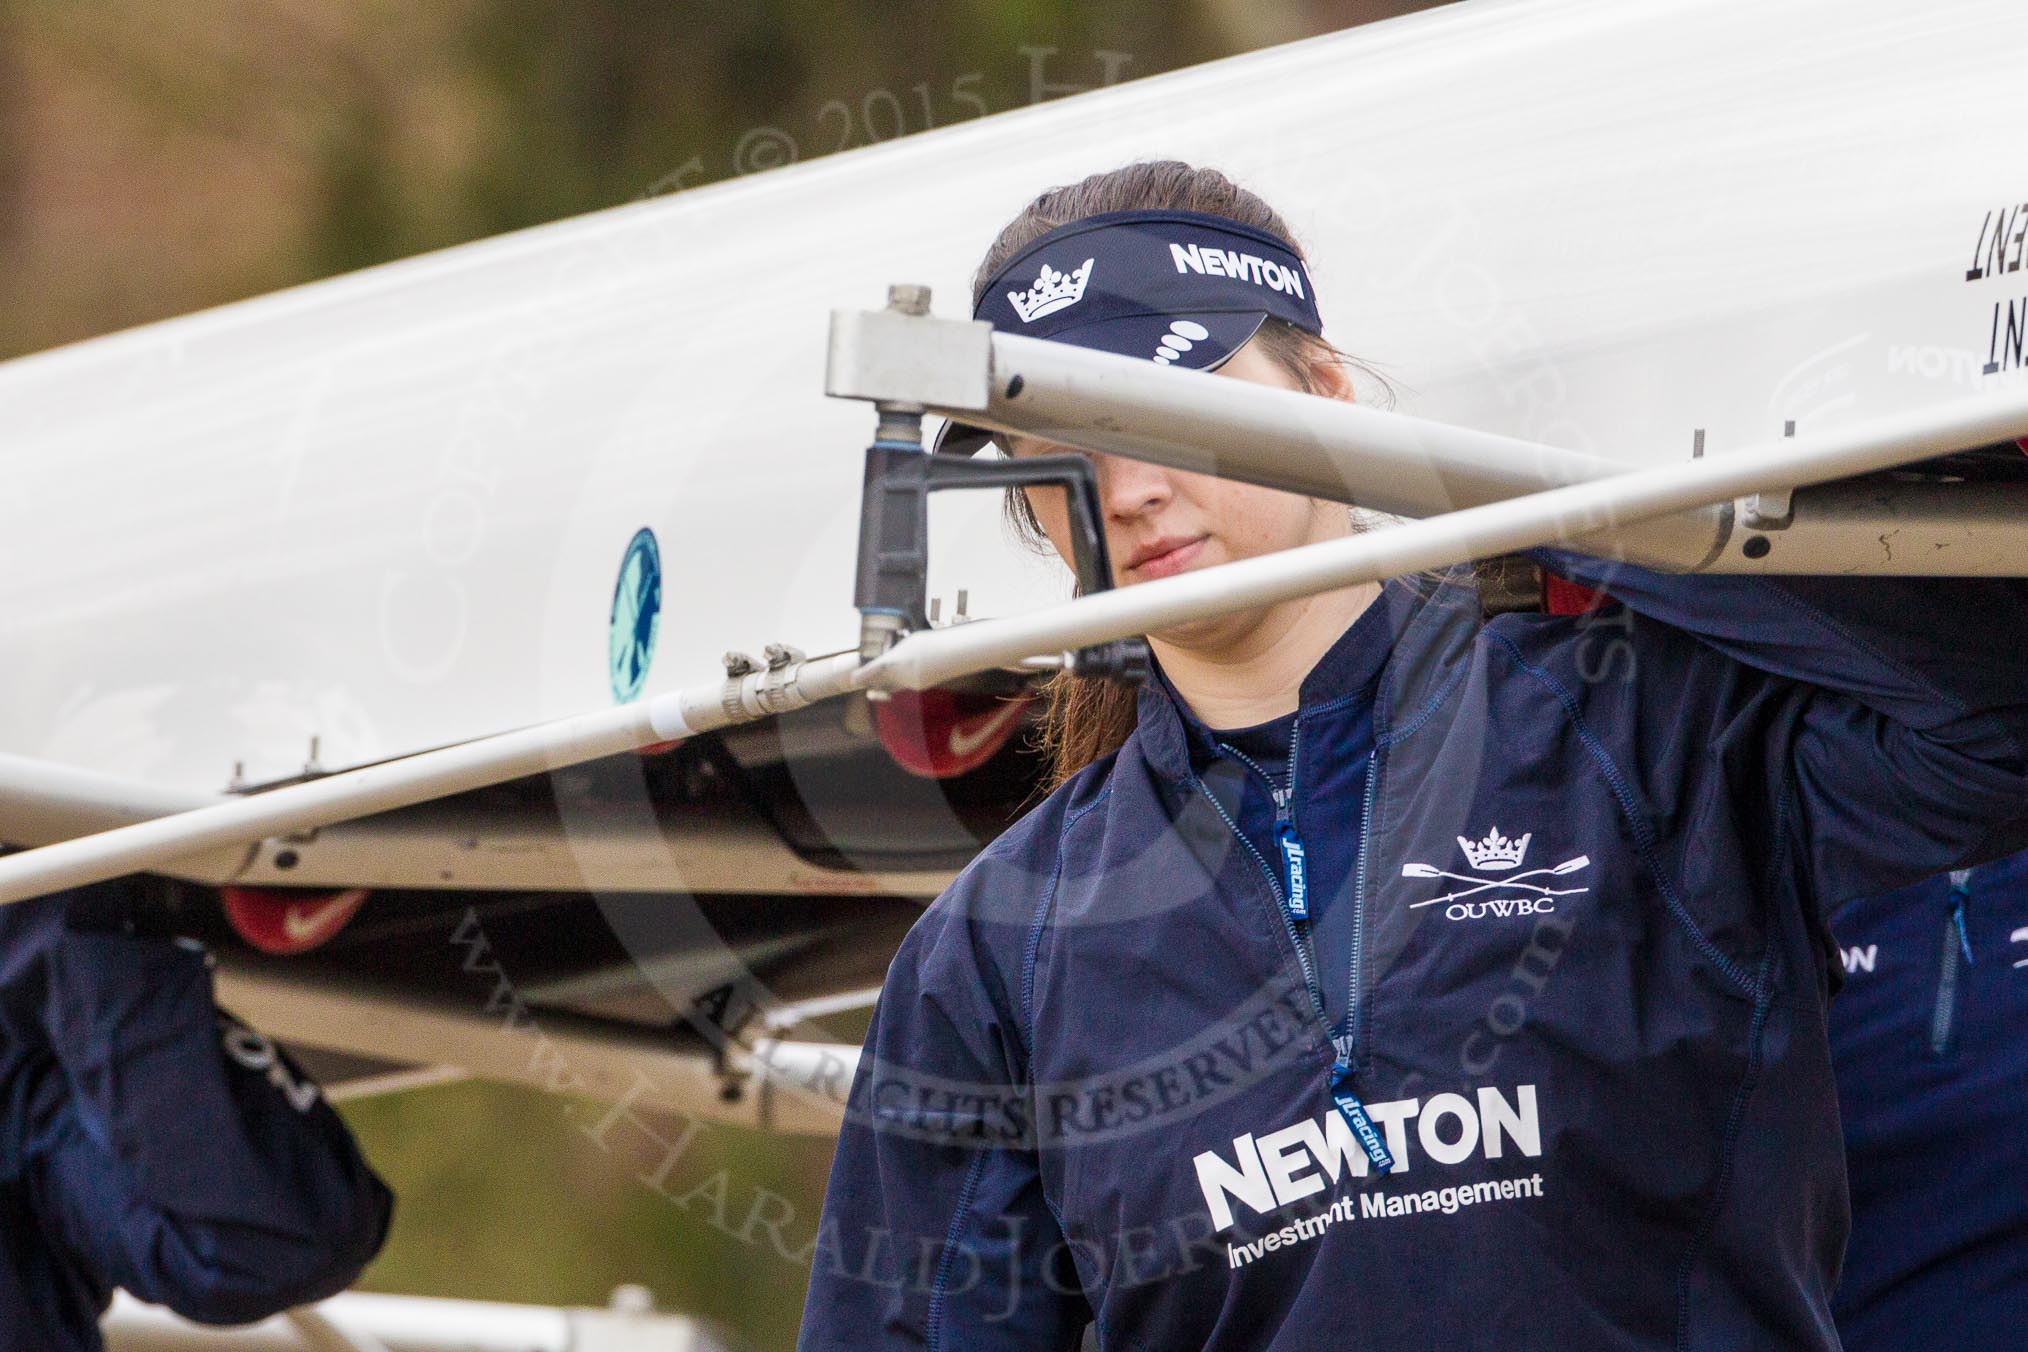 The Boat Race season 2016 - OUWBC training Wallingford: Chloe Farrar (?) carrying Osiris, the OUWBC reserve boat.
River Thames,
Wallingford,
Oxfordshire,

on 29 February 2016 at 15:15, image #25